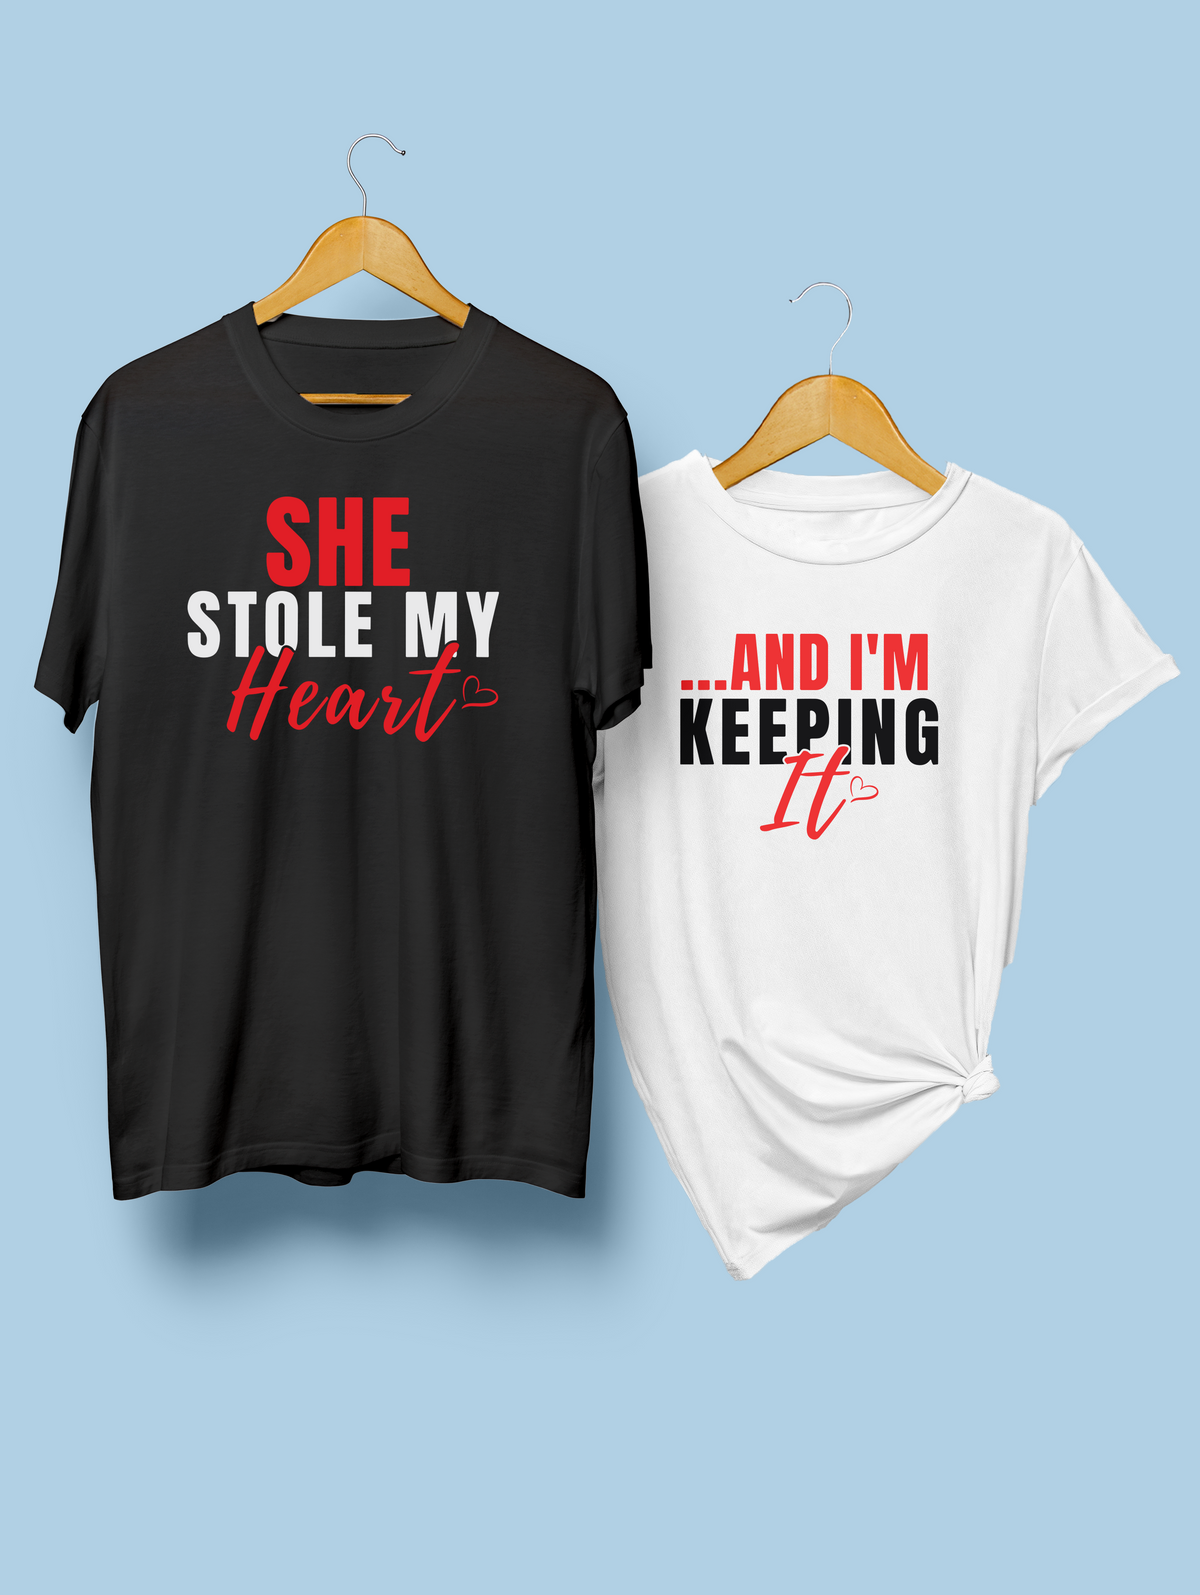 Stole my heart Couples T-shirt